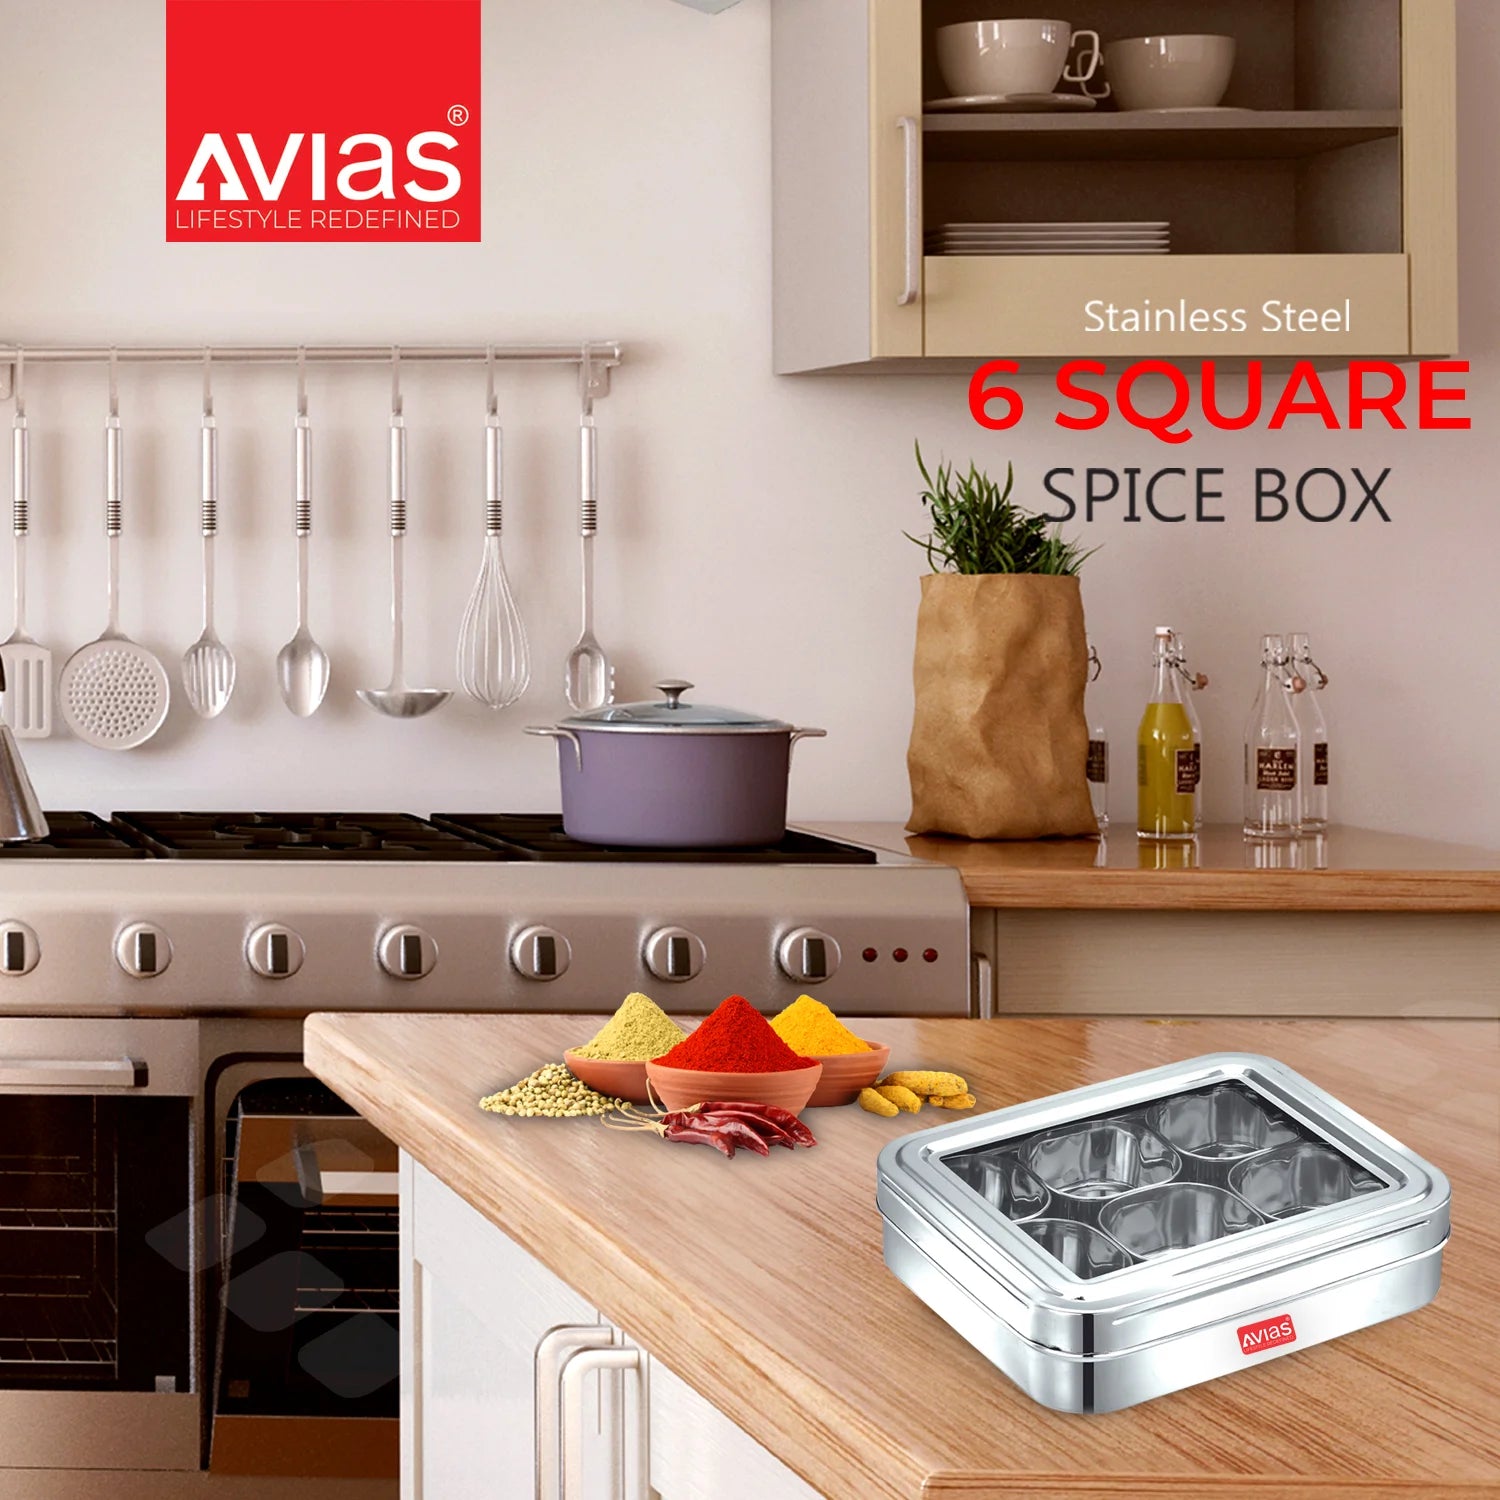 AVIAS Dry Fruit/ Spice Box- 6 Square Spice Box in the kitchen